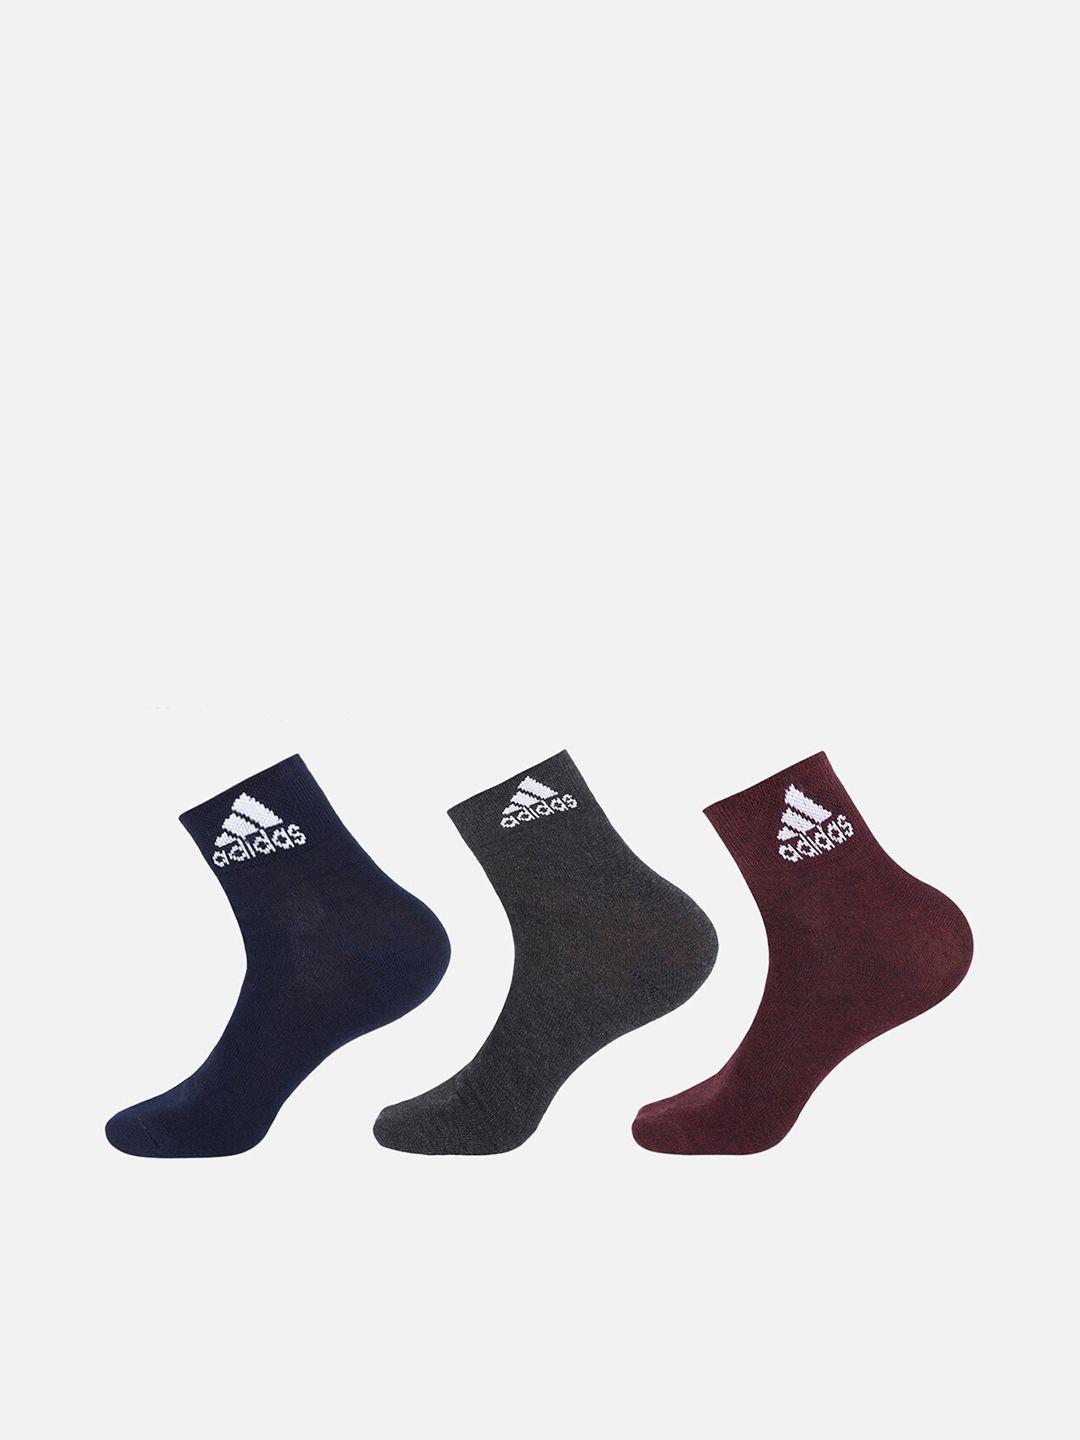 adidas-men-pack-of-3-solid-flat-knit-ankle-length-socks